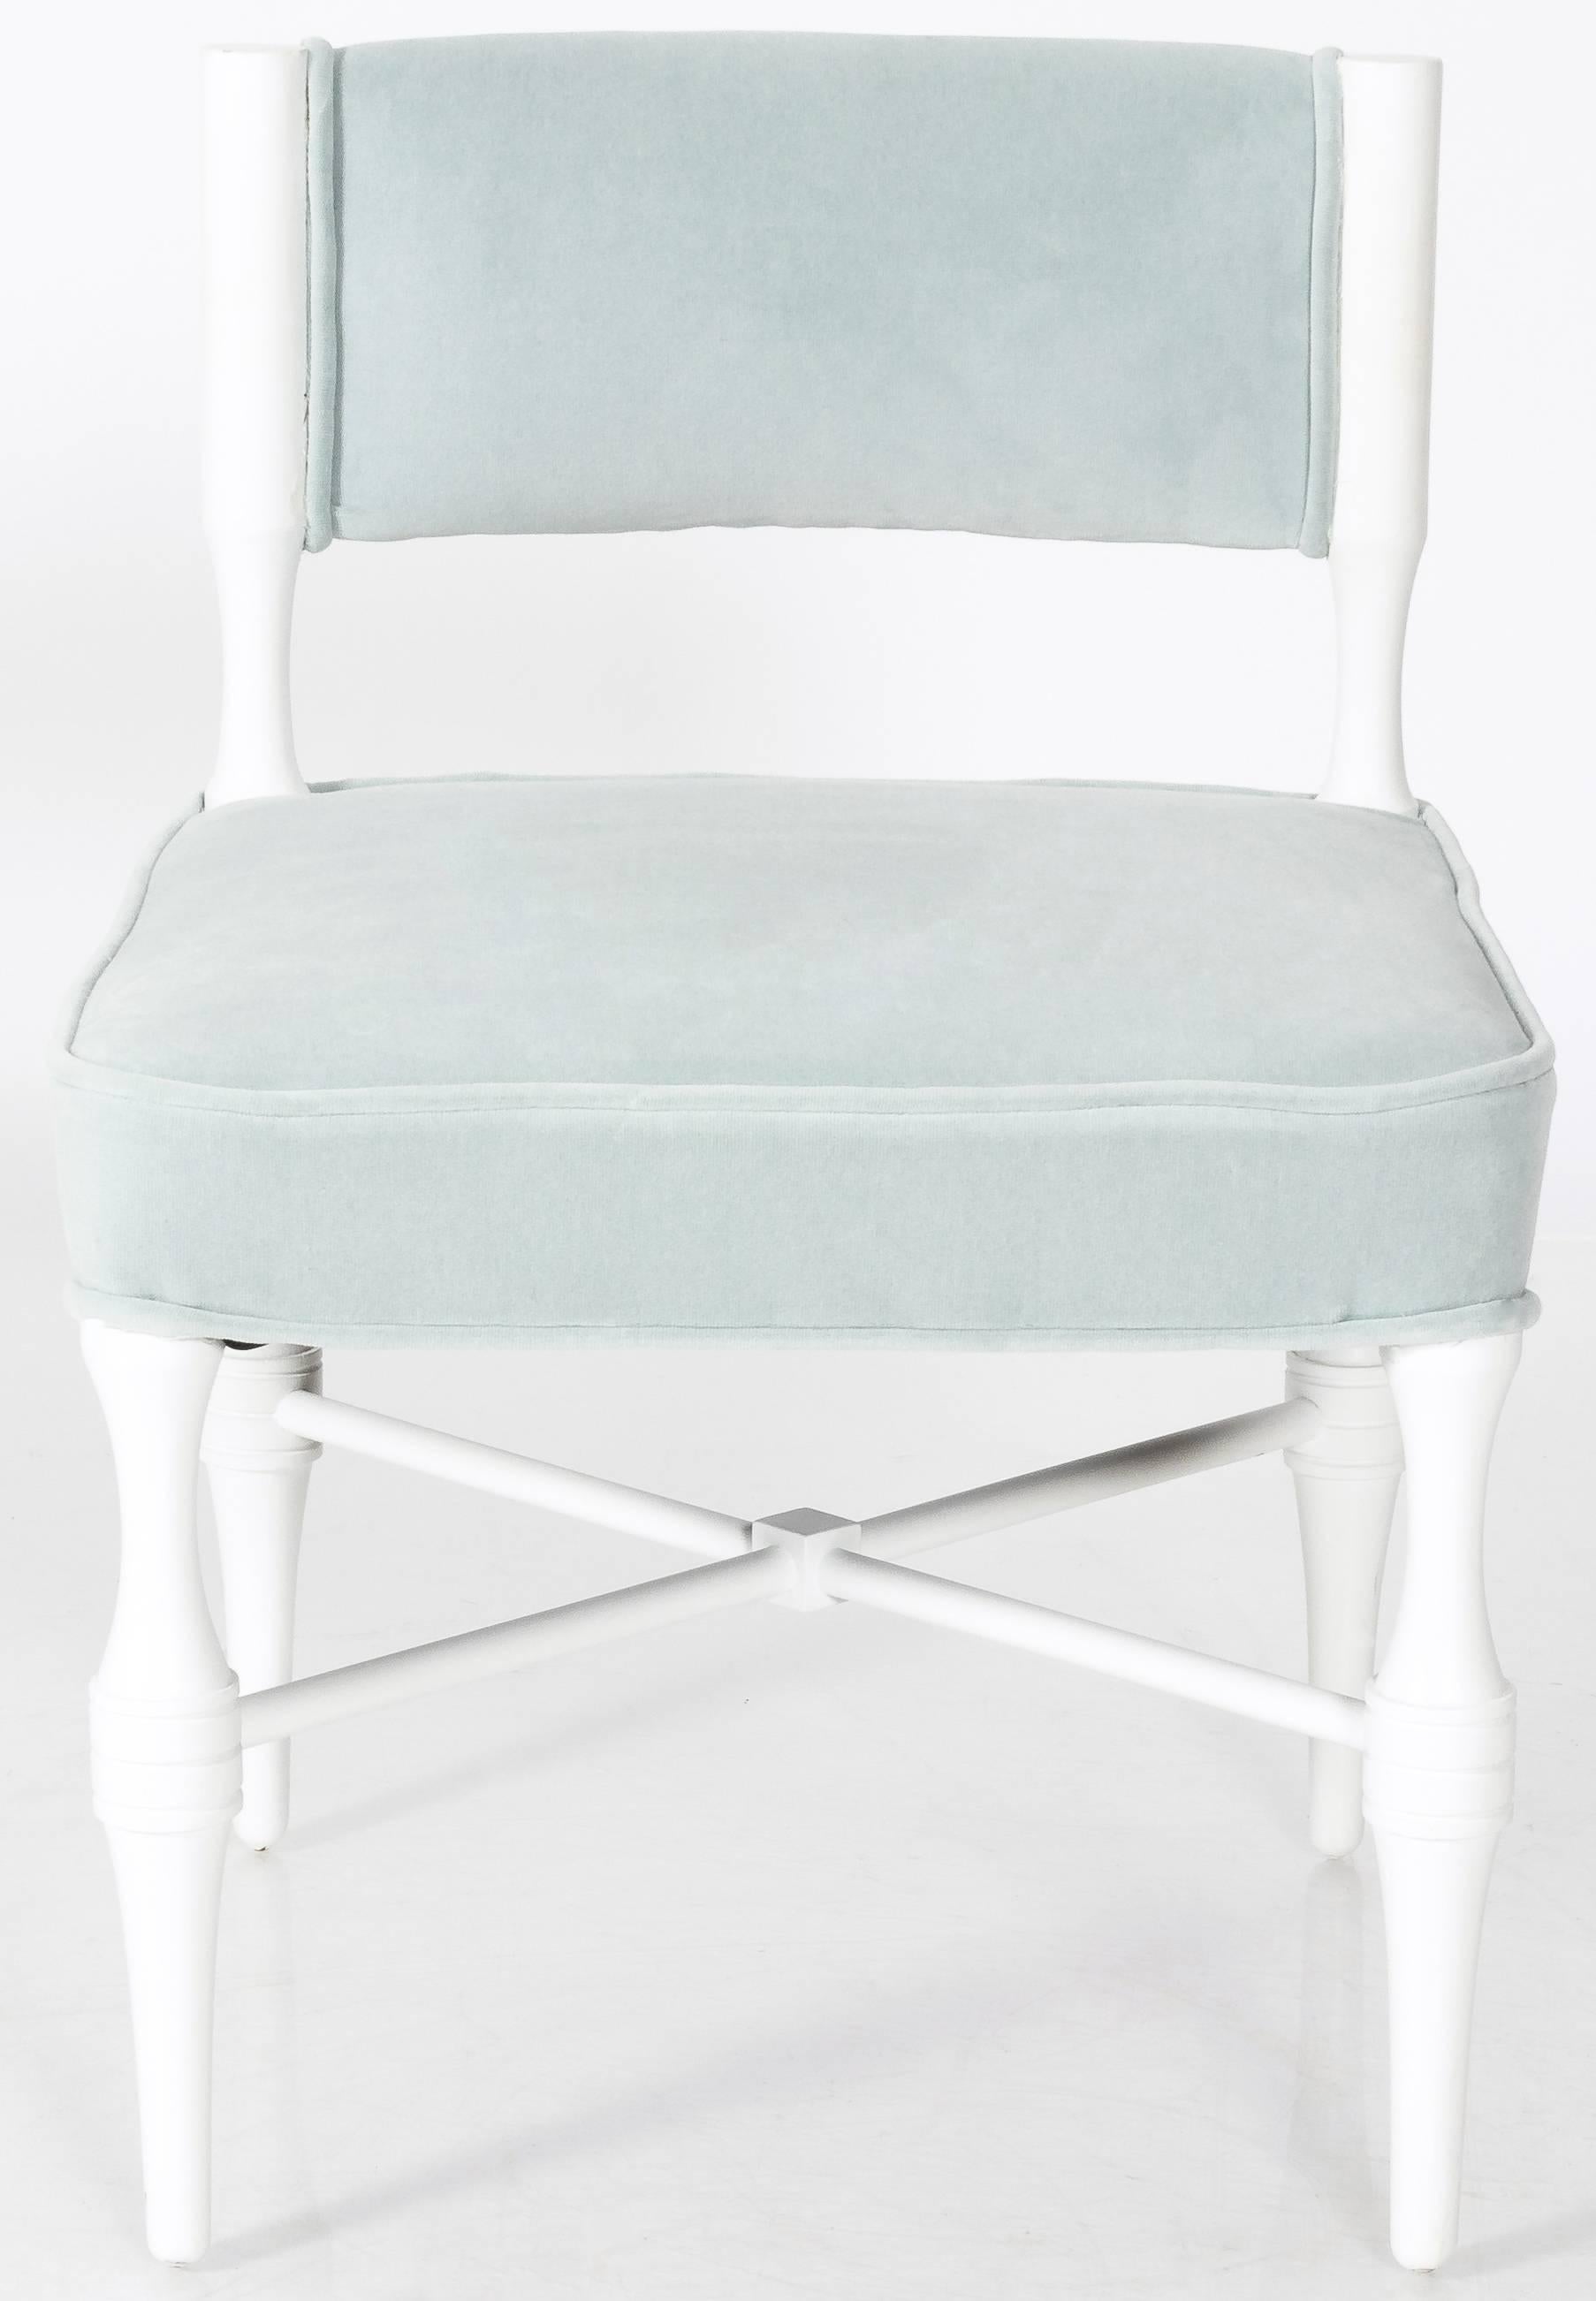 Pair of Tommi Parzinger petite slipper or vanity chairs. White painted frames. Newly upholstered in light blue cotton velvet by Rogers & Goffigon. No makers mark or signature. Chairs are only available as a pair (will not split set).